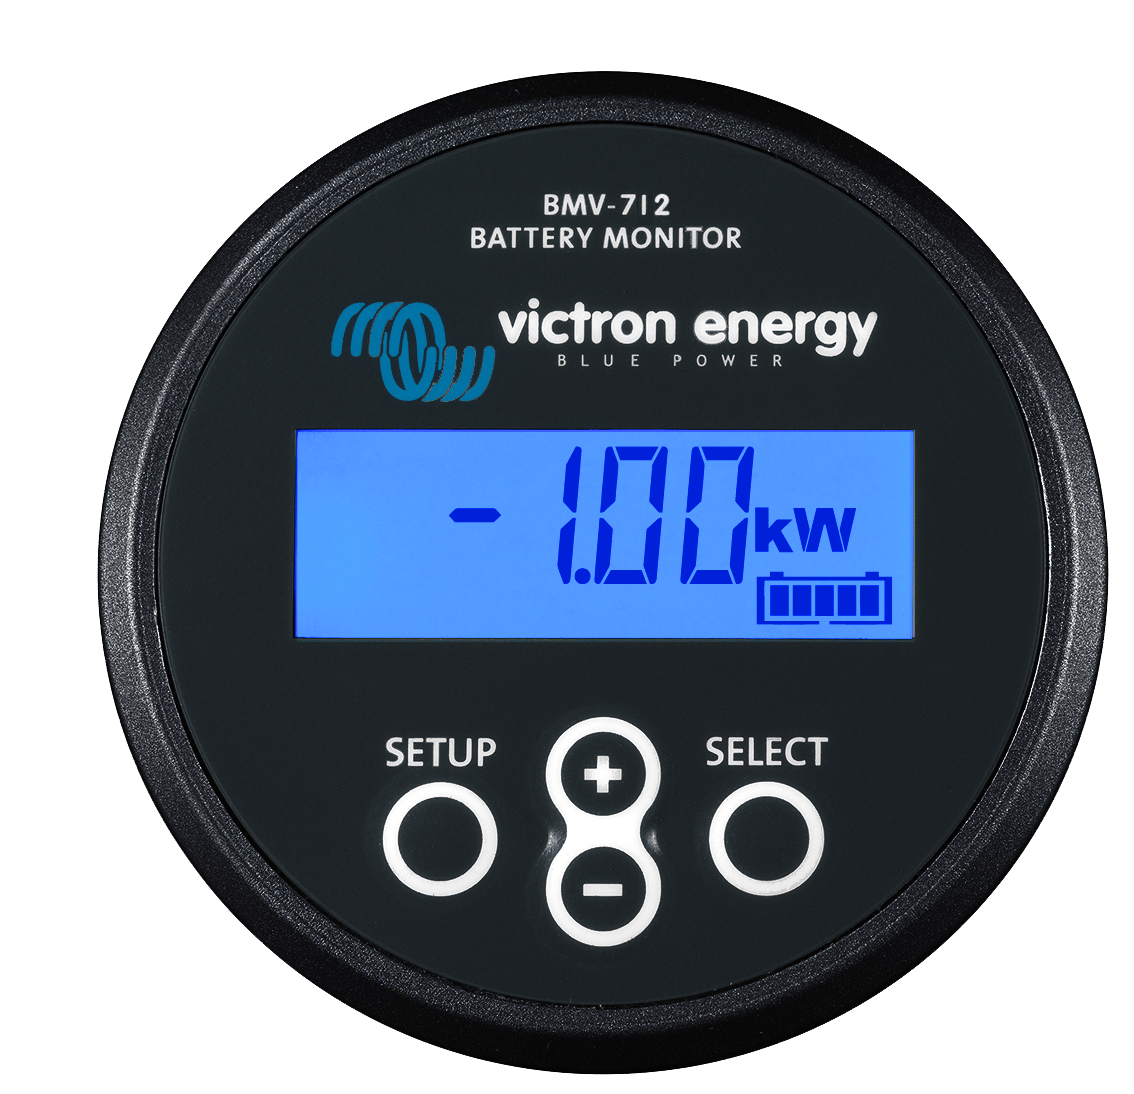 Is a 500 amp shunt included with the Victron BMV 712? 